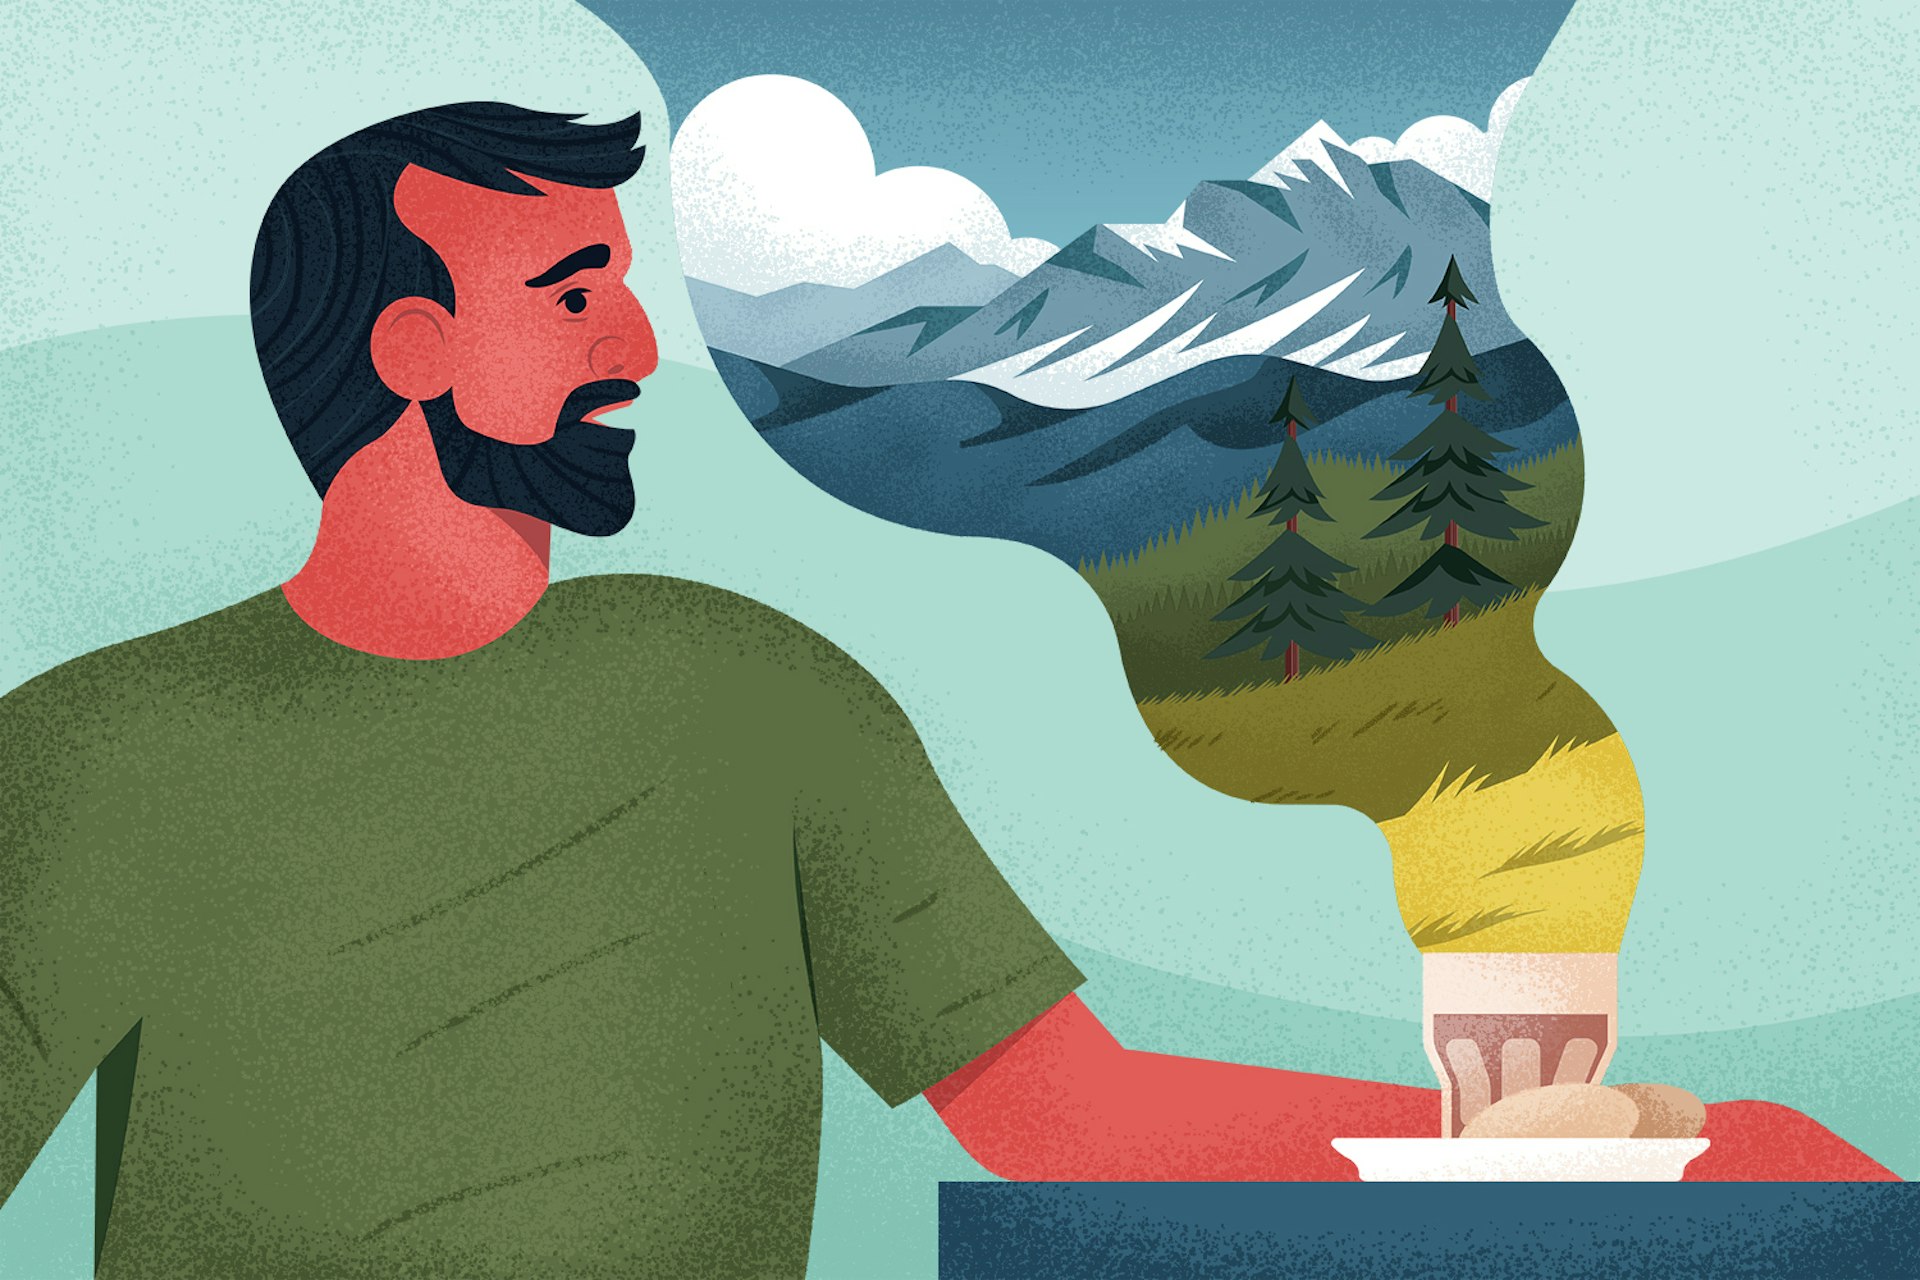 Illustration of a man siting at a table with food and a drink in front of him. The "steam" from the drink reveals a beautiful mountains scene.